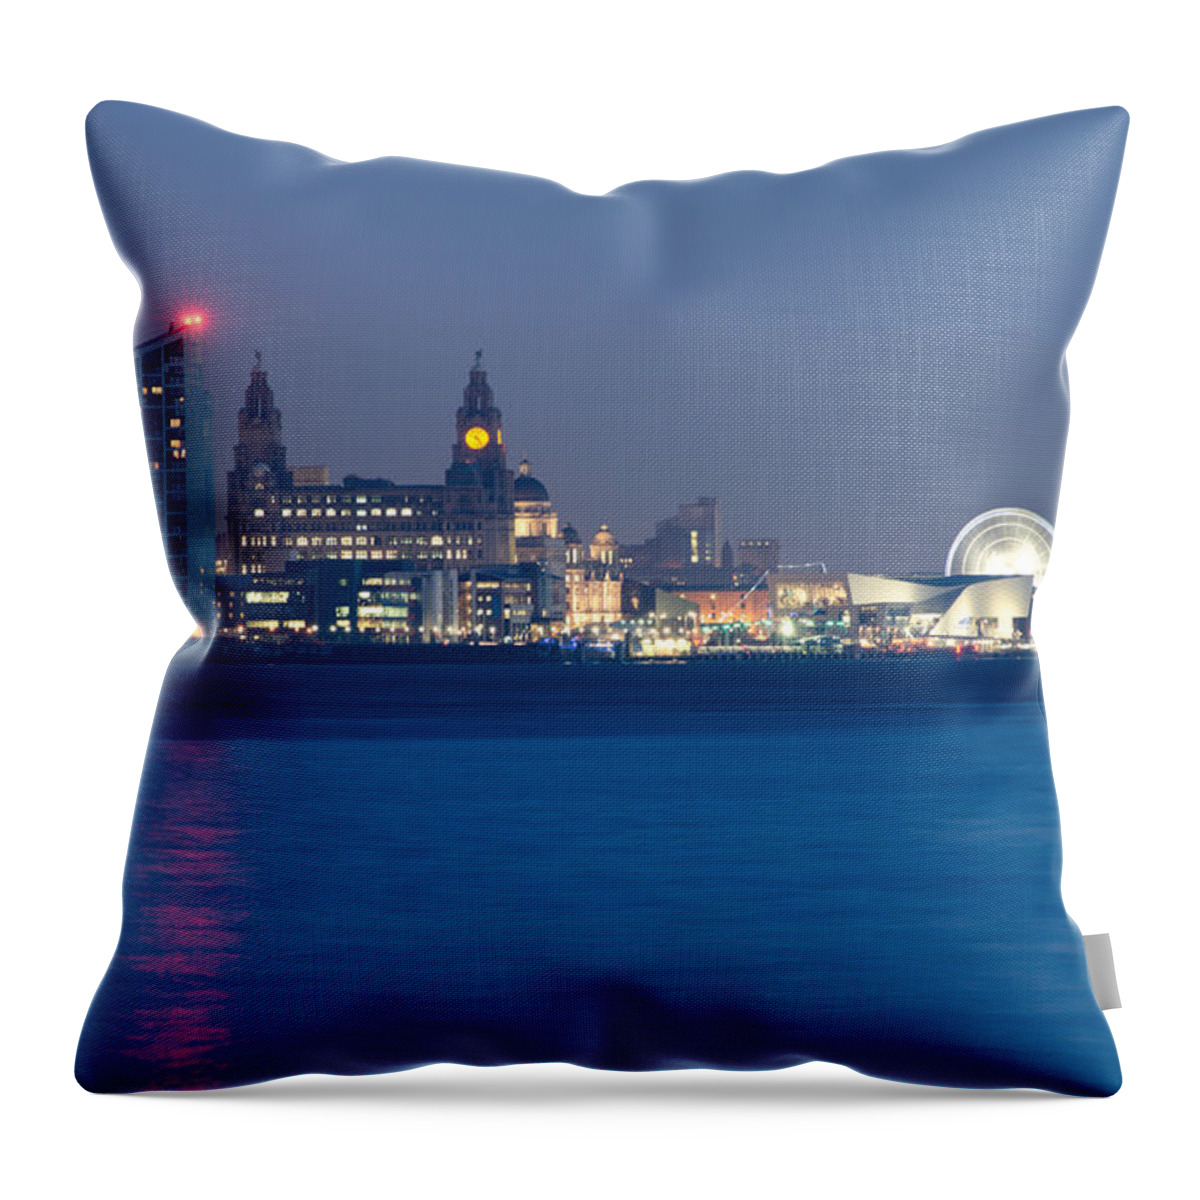 3 Graces Throw Pillow featuring the photograph Liverpool Waterfront by Spikey Mouse Photography